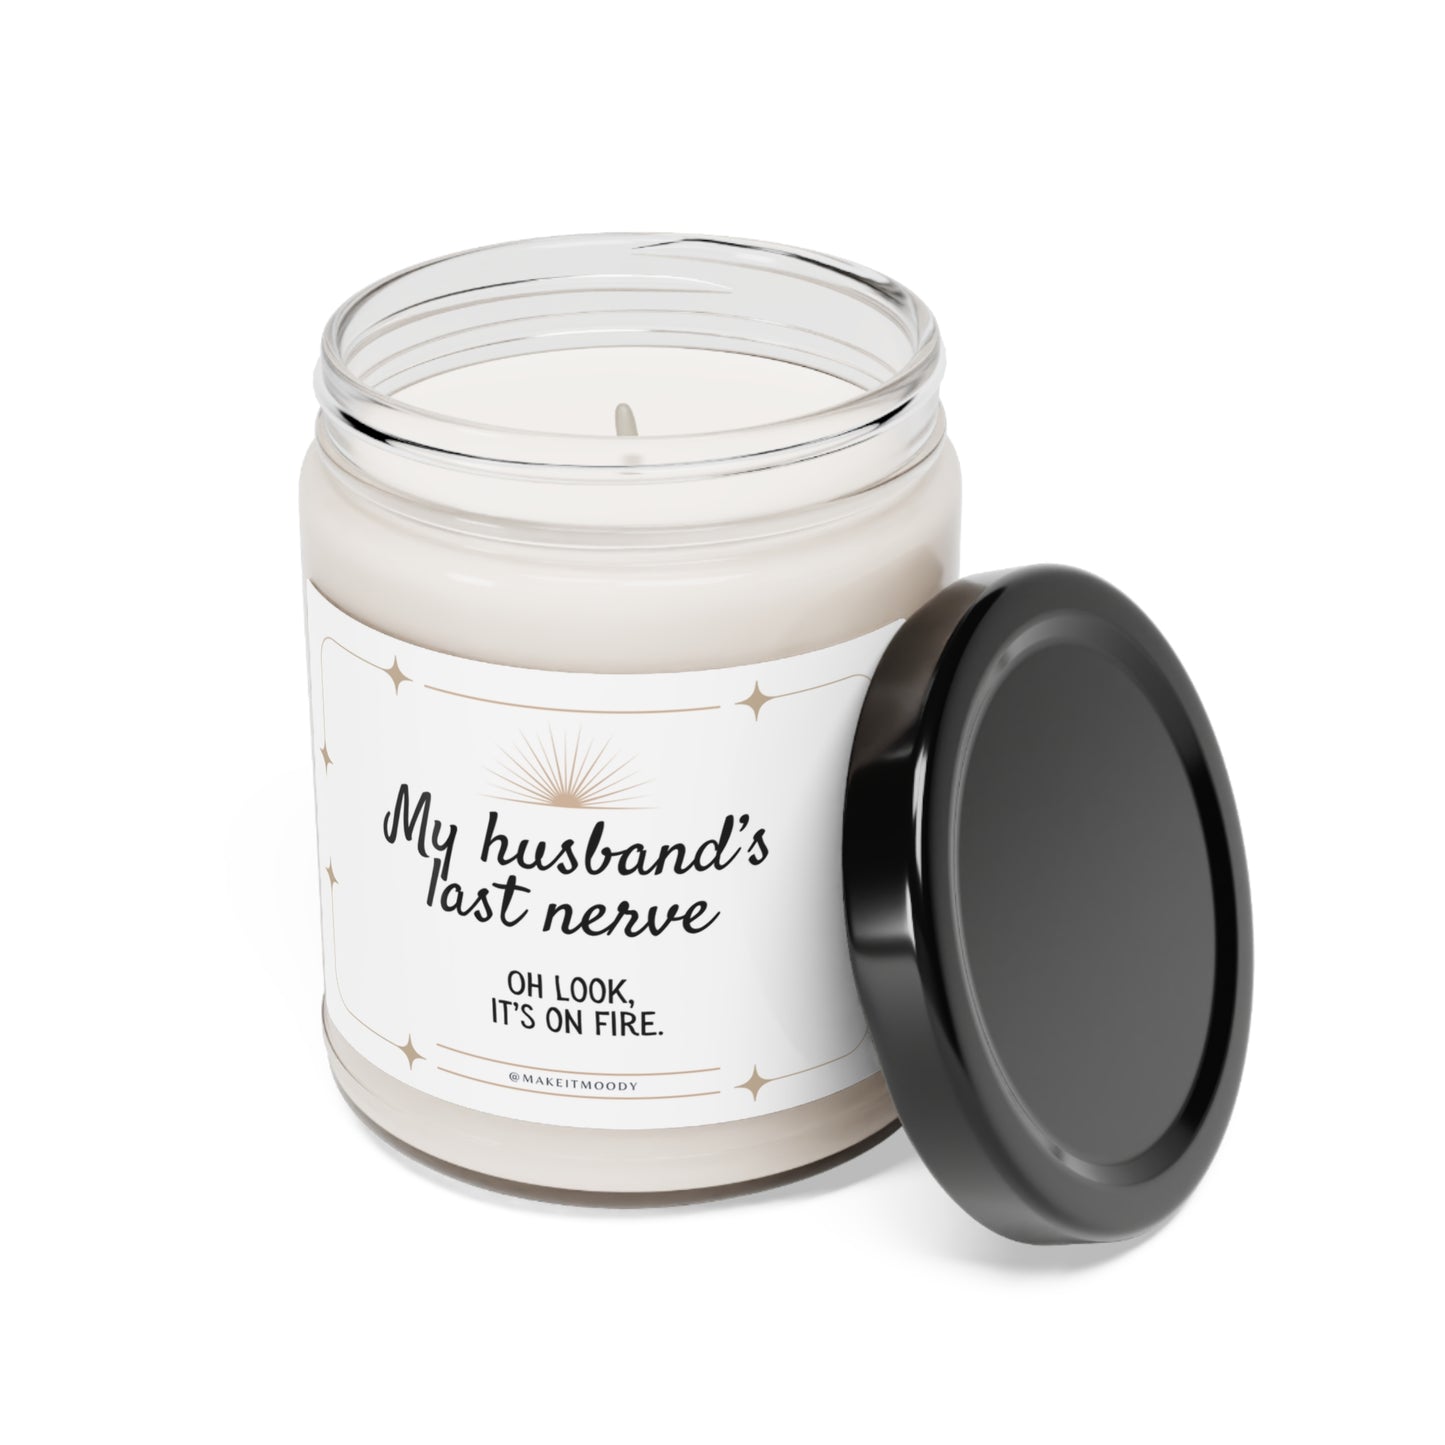 "My Husband's Last Nerve" Scented Soy Candle, 9oz